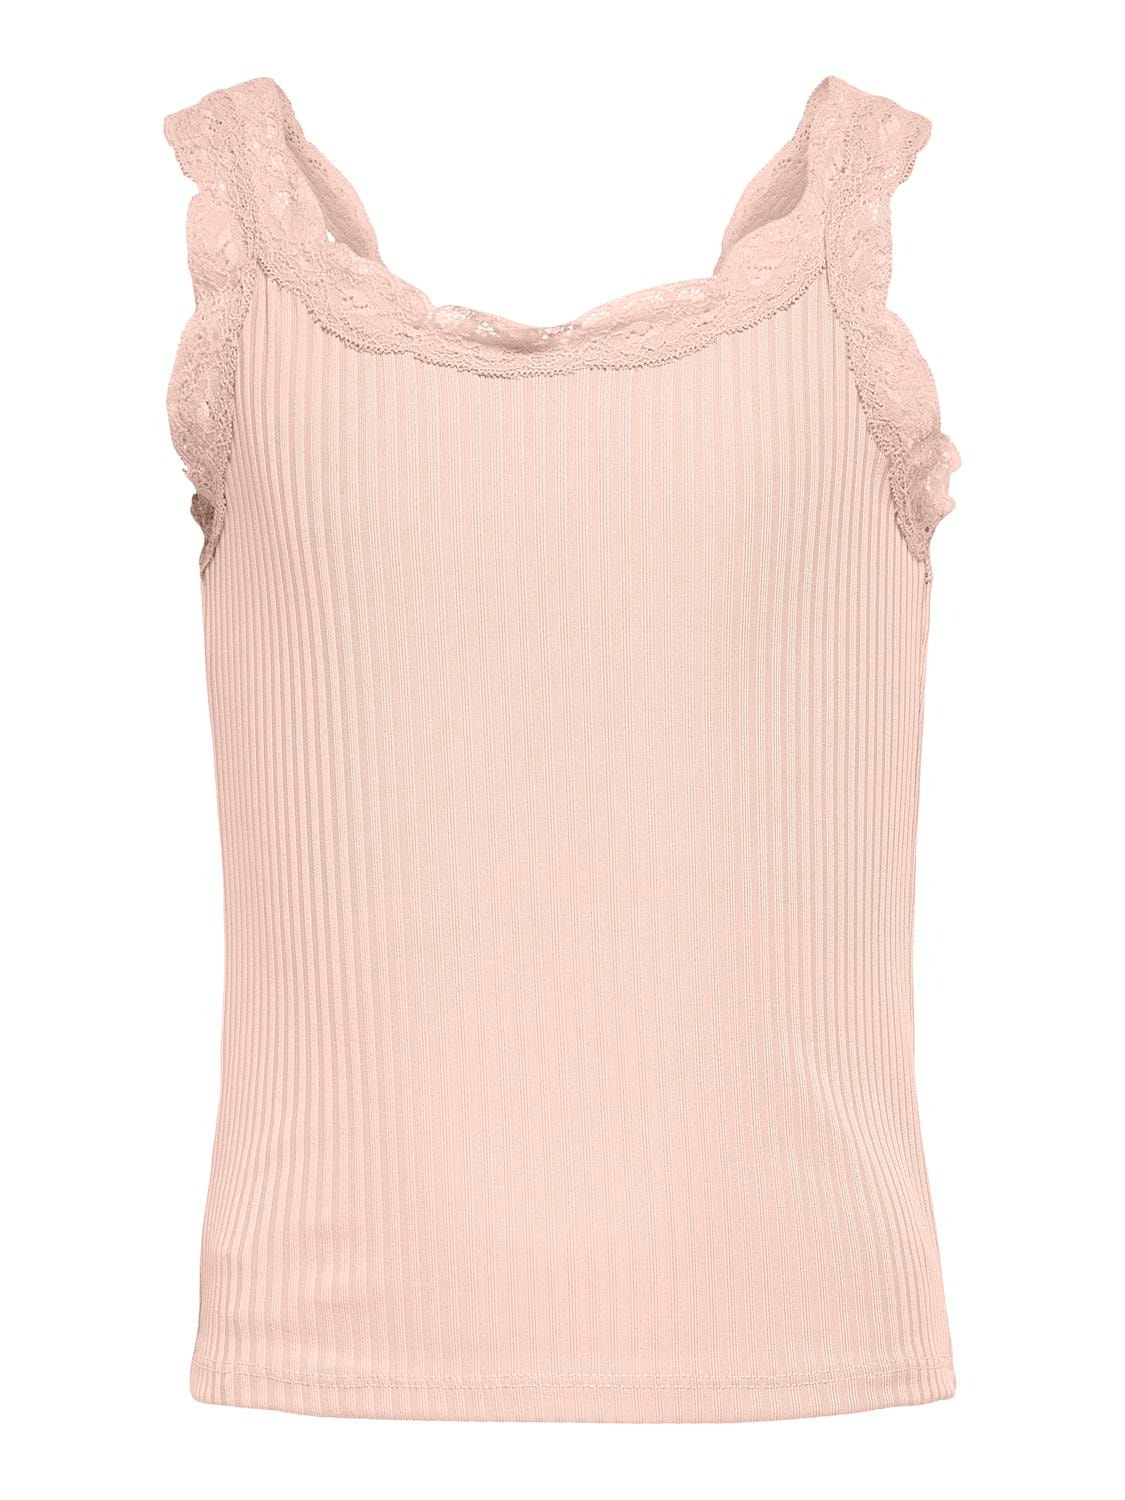 ONLY Lace detail Top -Soft Pink - 15240741